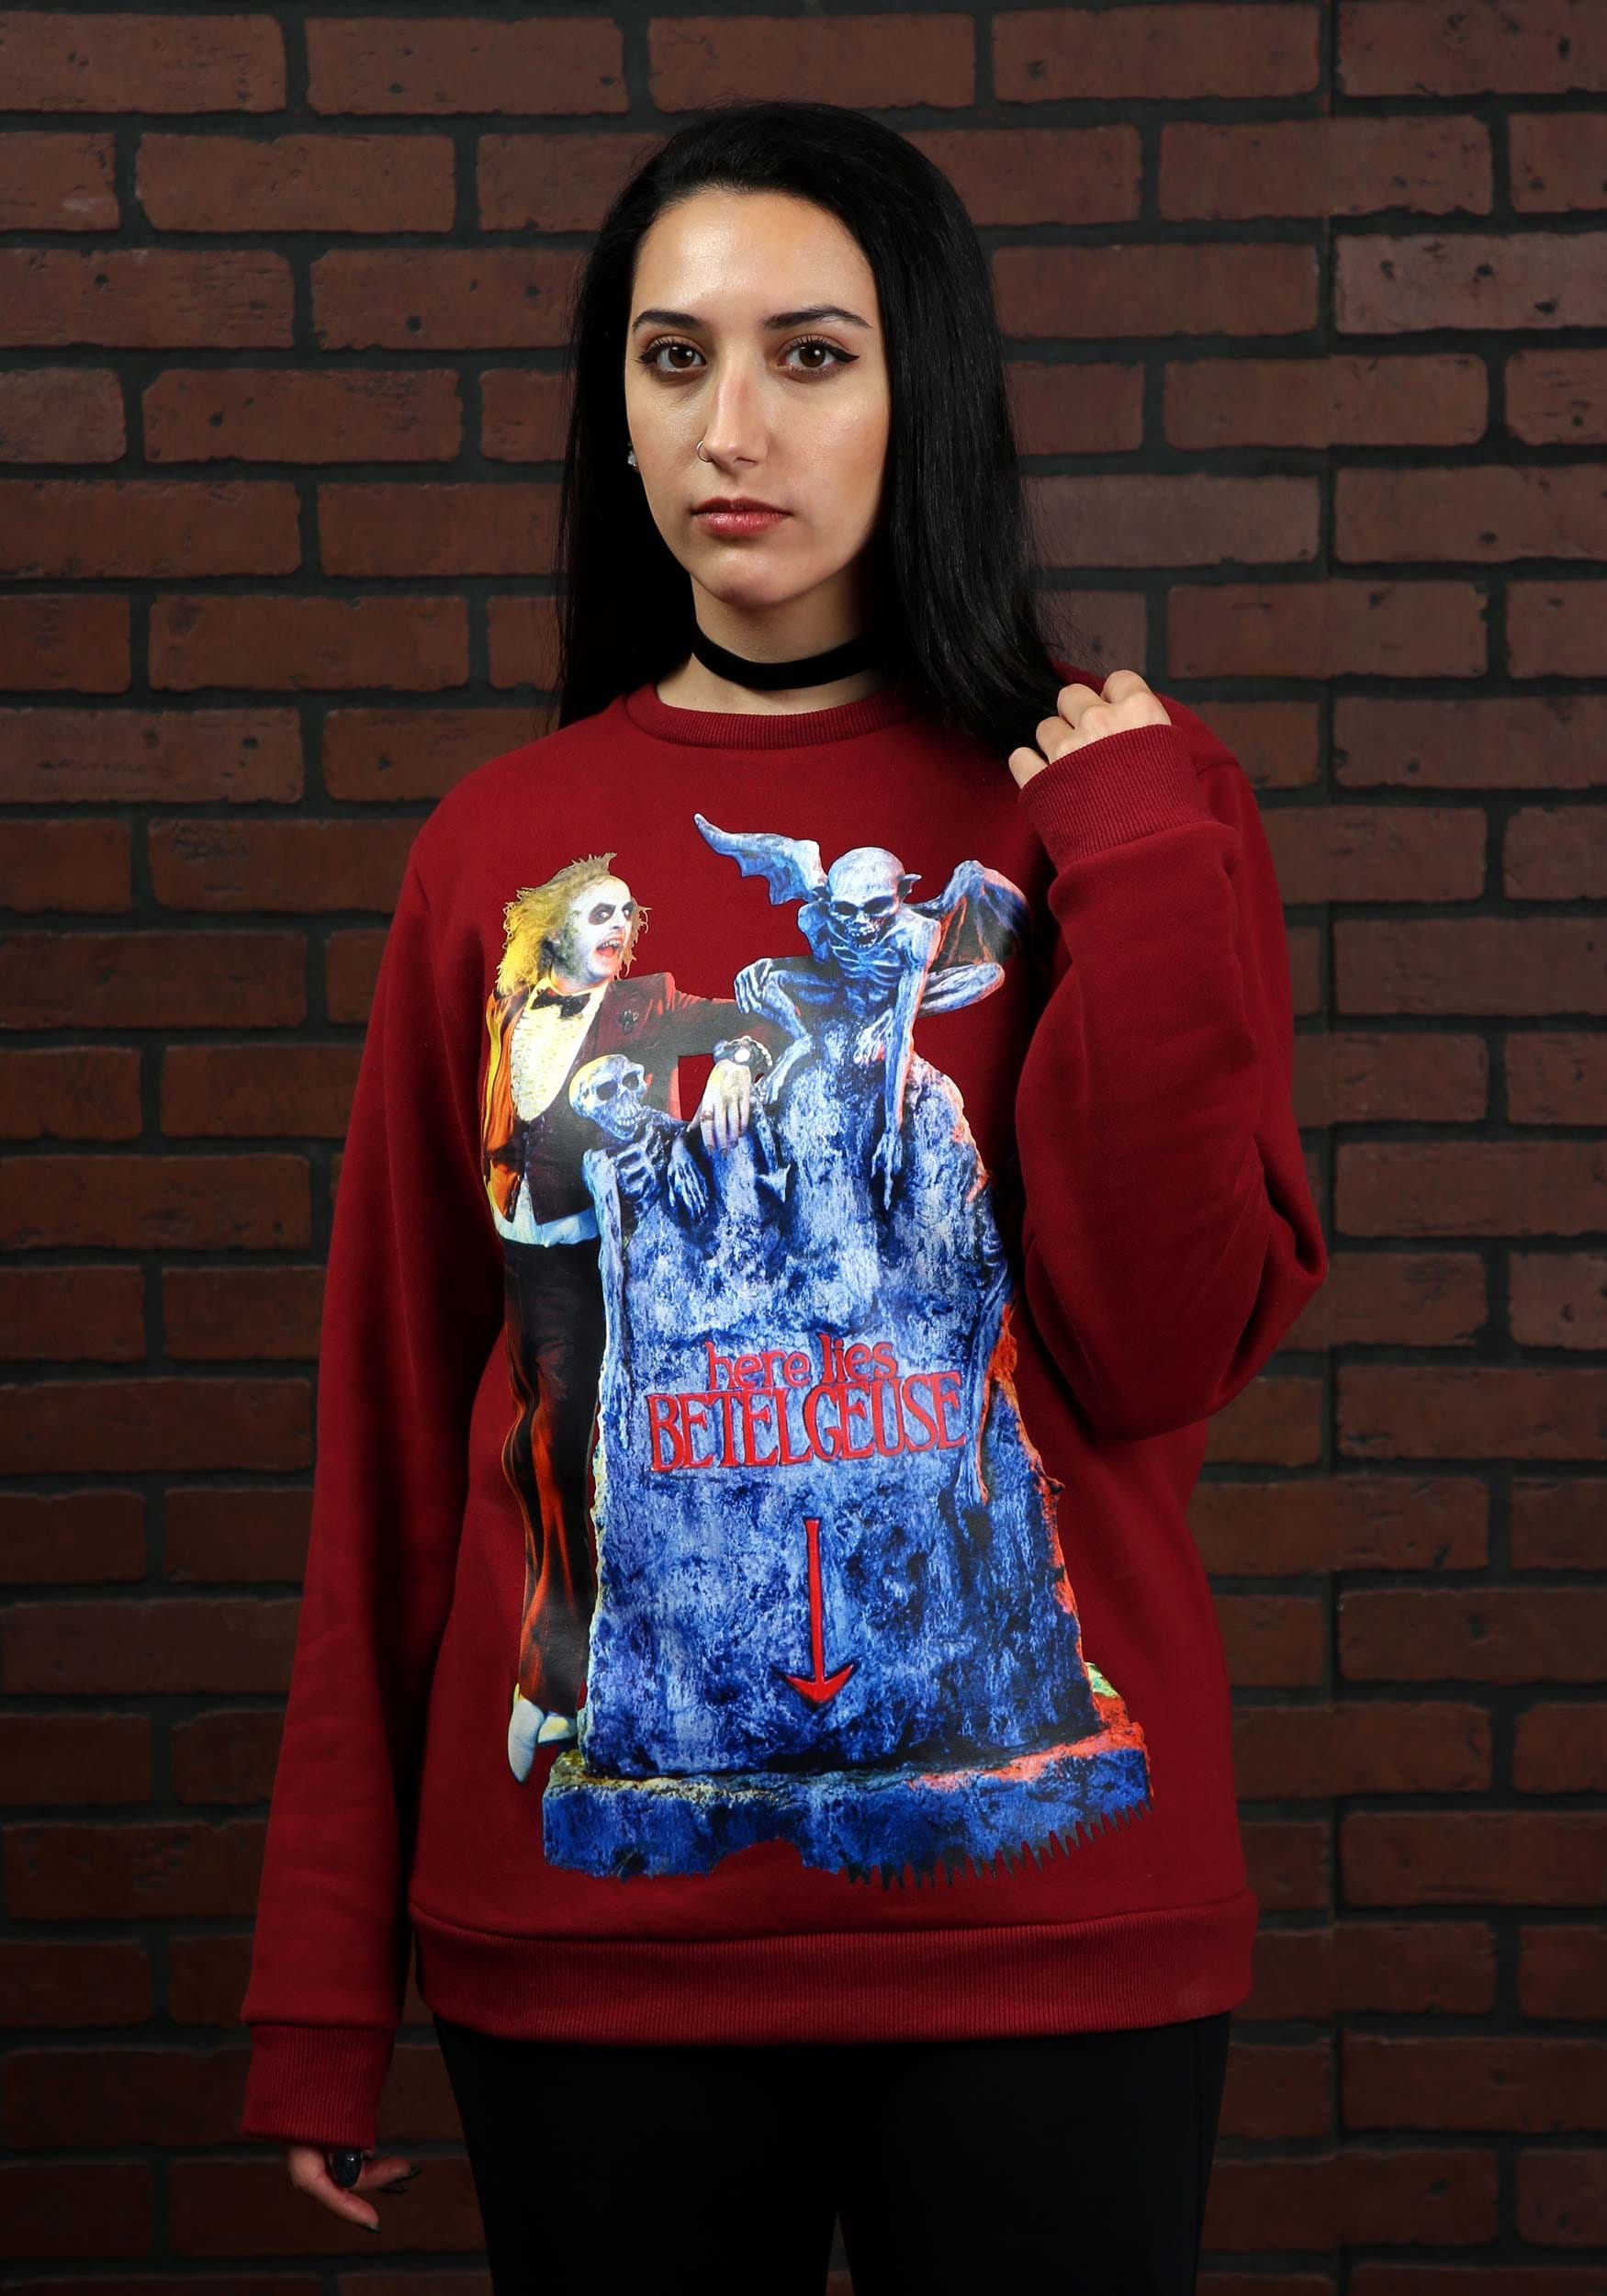 Cakeworthy Beetlejuice Tombstone Crew Neck Sweater For Adults